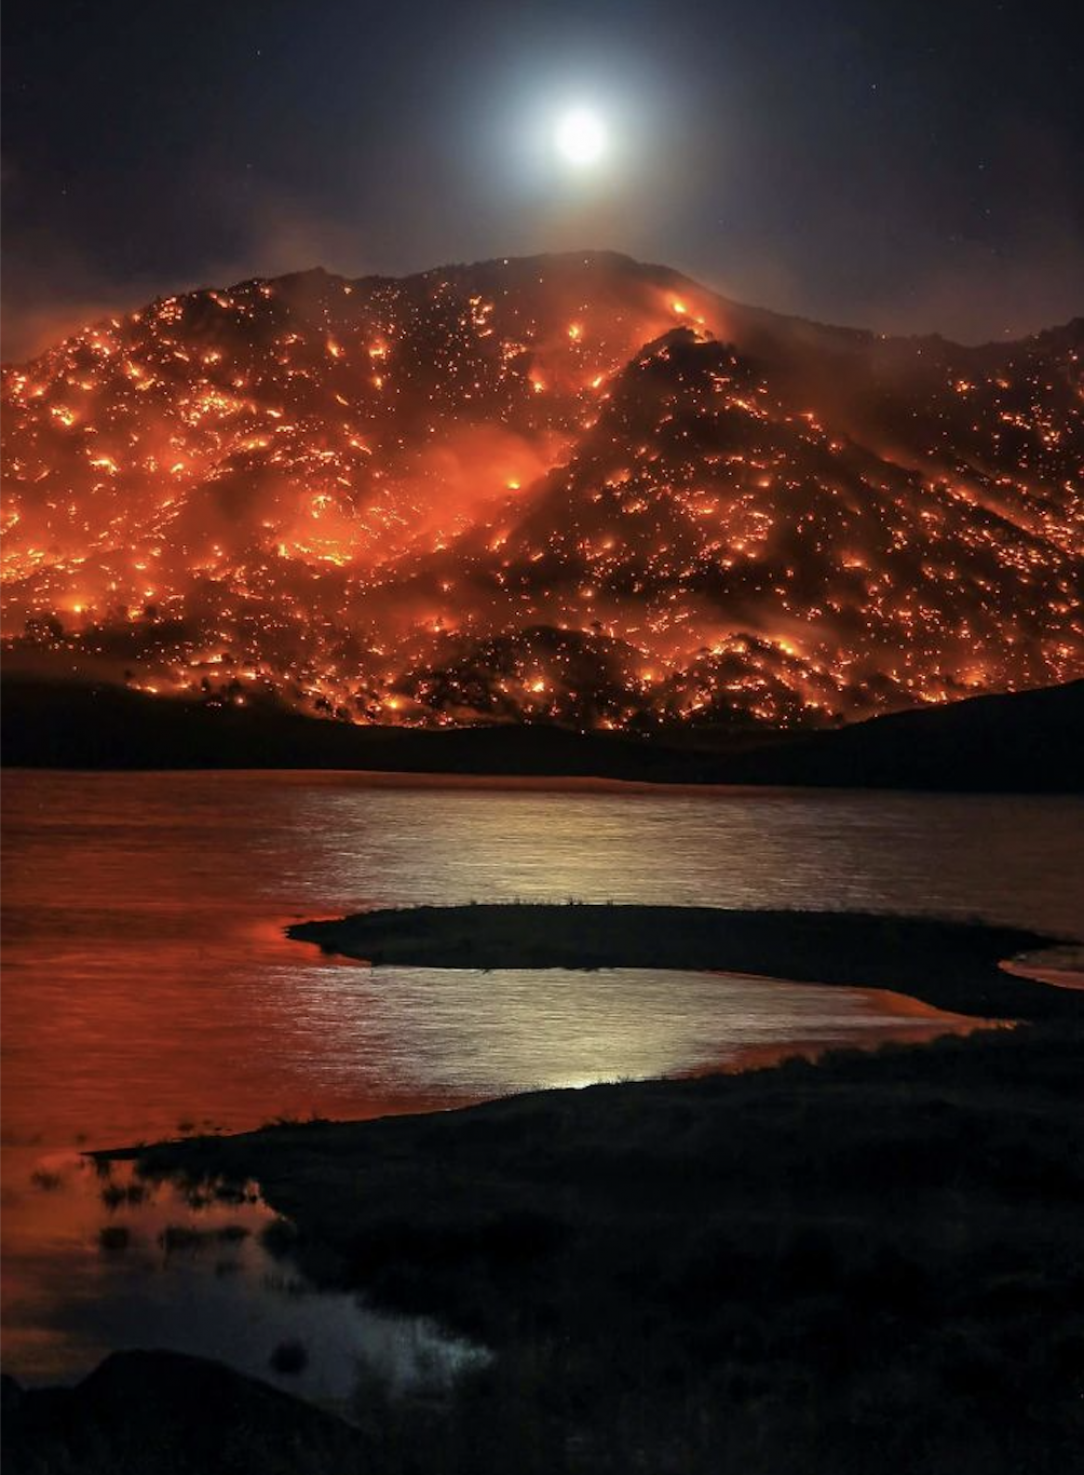 The moon rising over a hill in California, engulfed in a wildfire